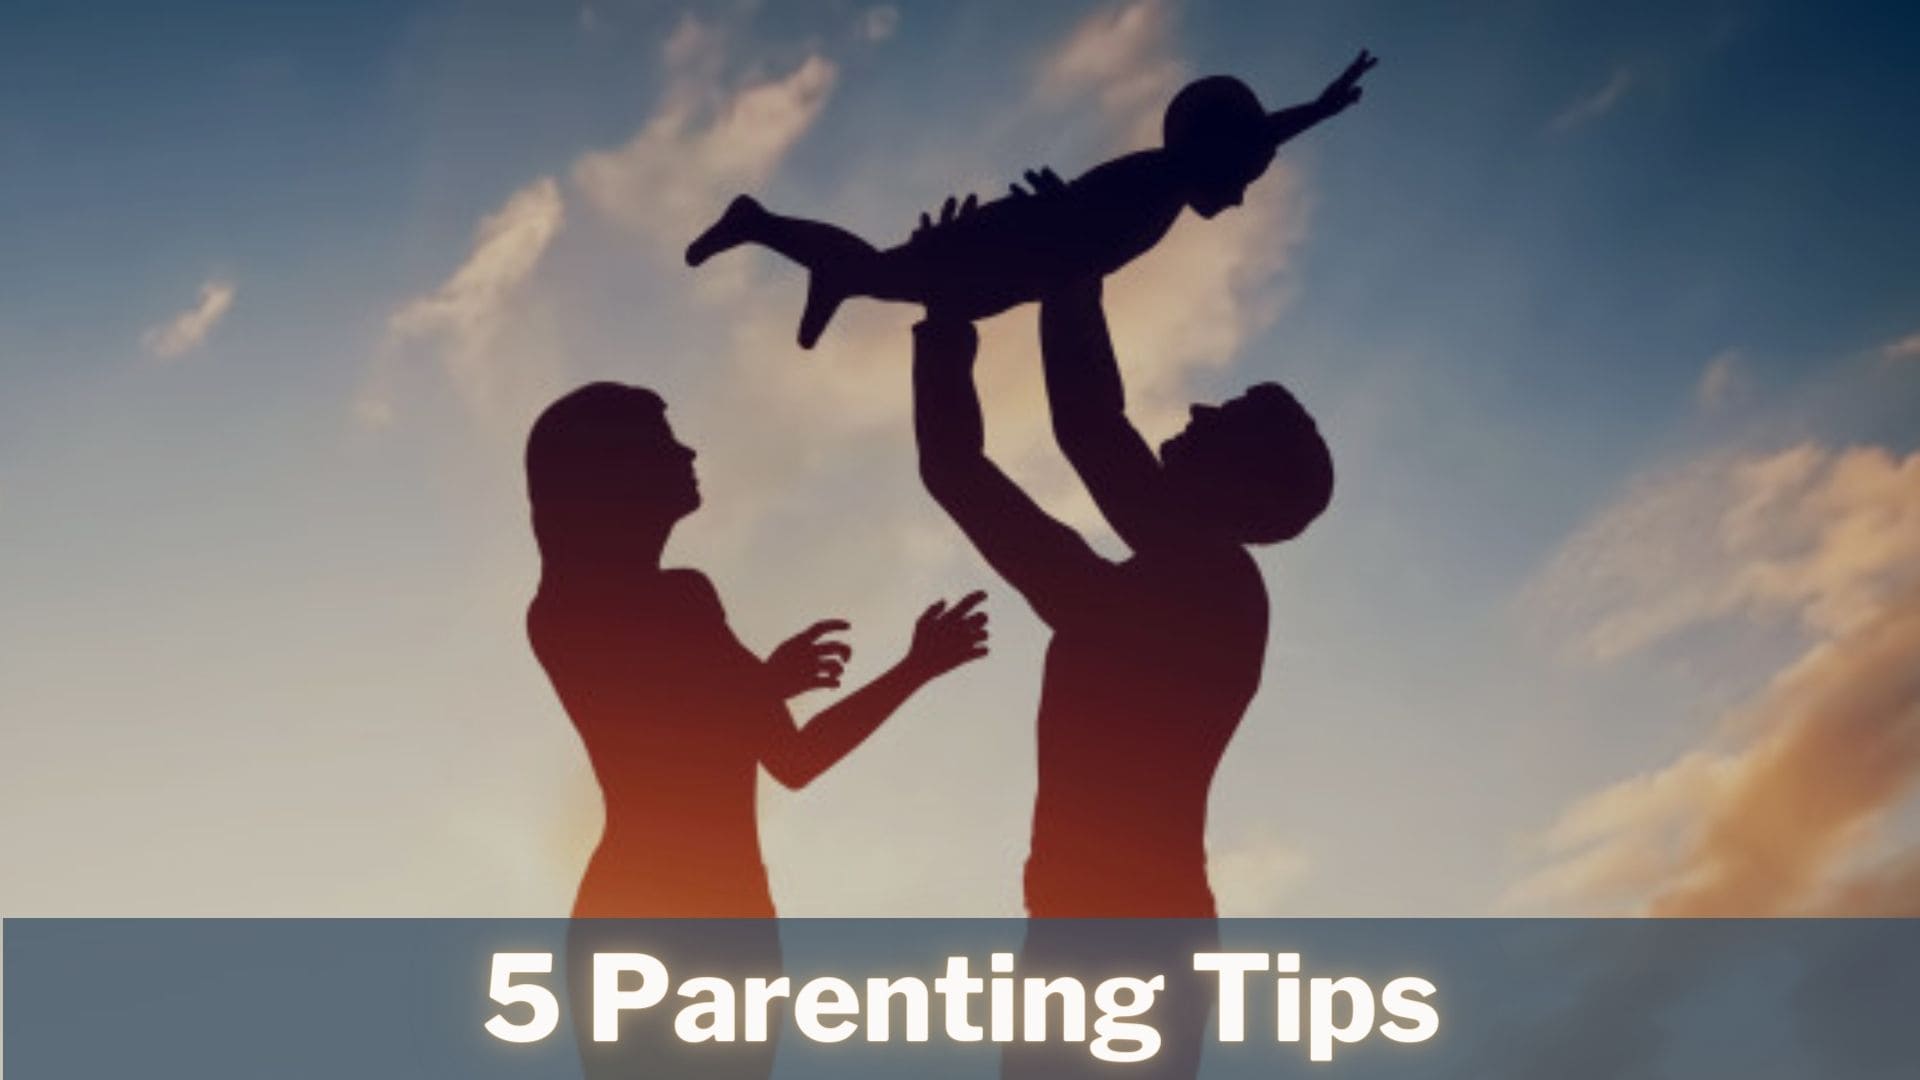 Parenting Tips: 5 Proven Ways to Have your Kids Get Things Done